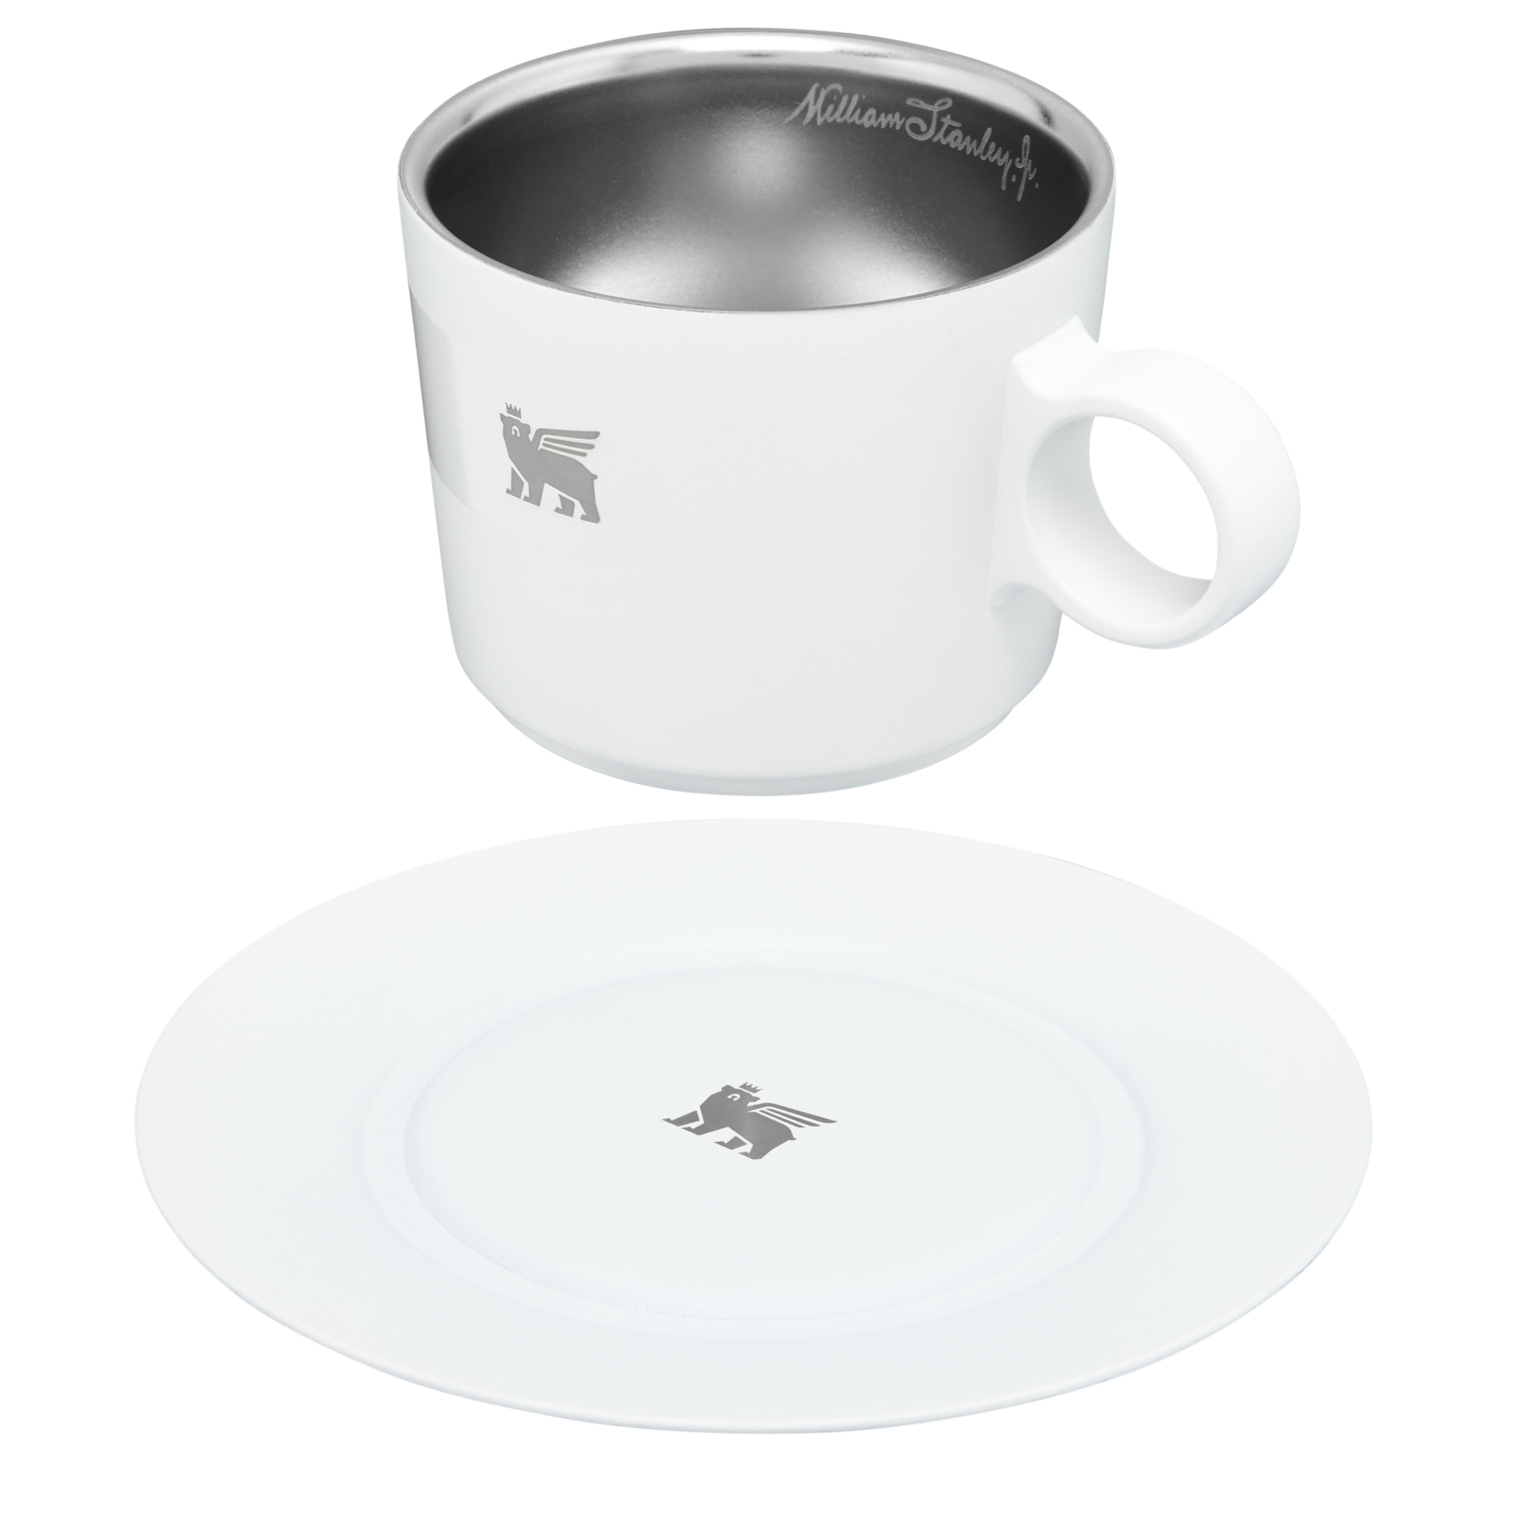 The DayBreak Cappuccino Cup & Stillness Saucer | 6.5 OZ: Pale Stone